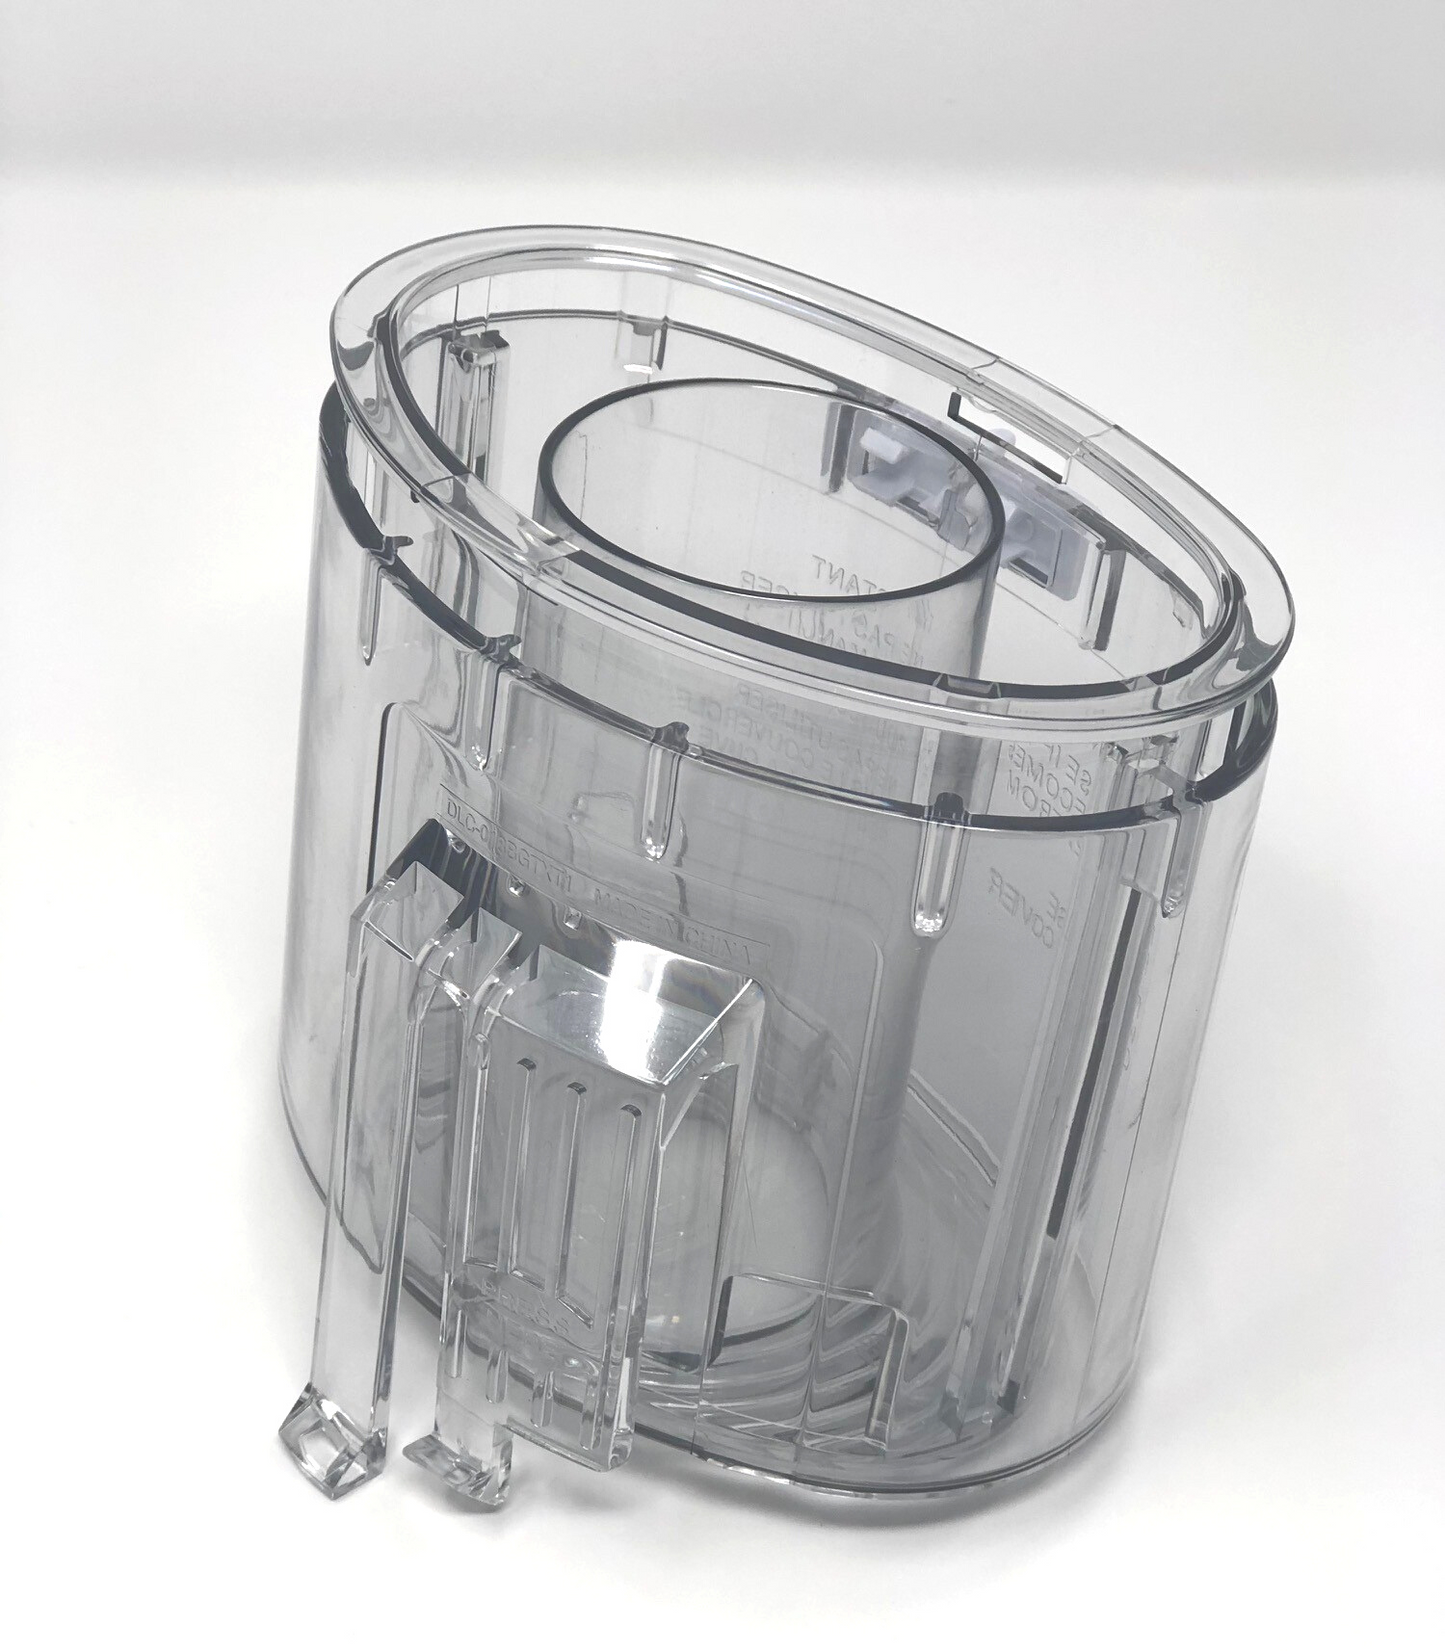 Cuisinart DLC-8 and DLC-7 Model Expanded Sleeve